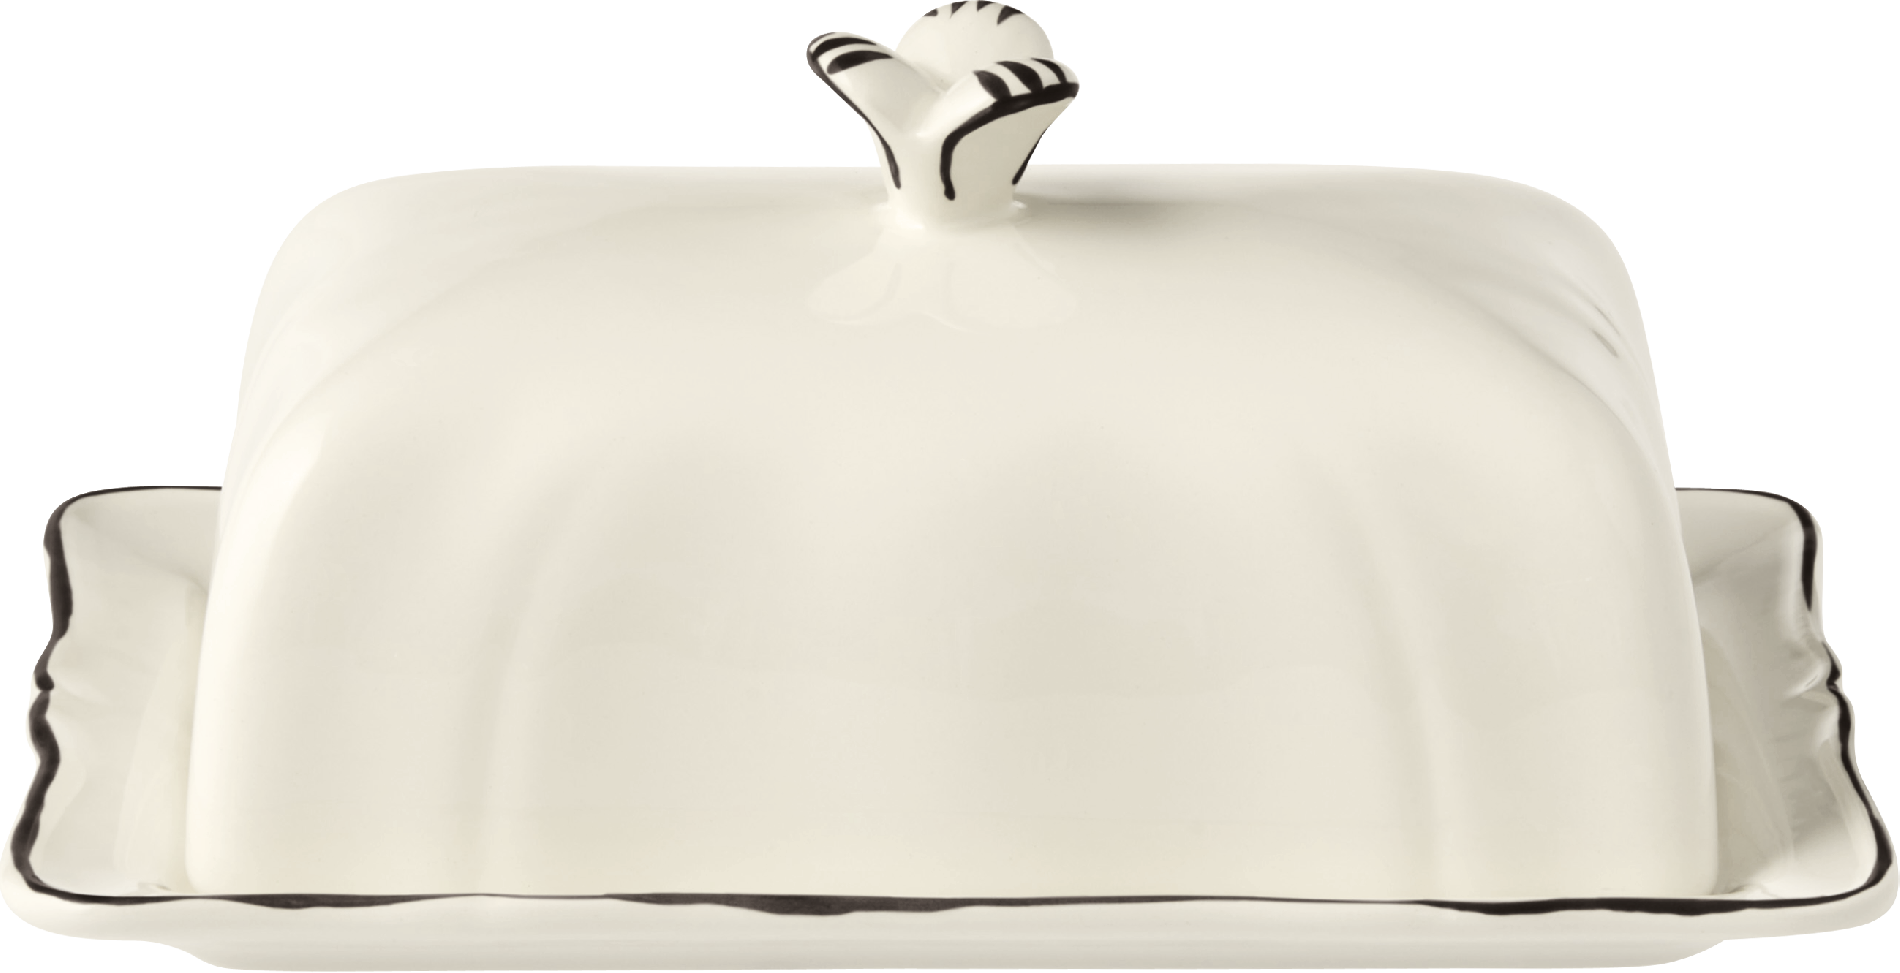 Covered Butter Dish, Filet Manganese